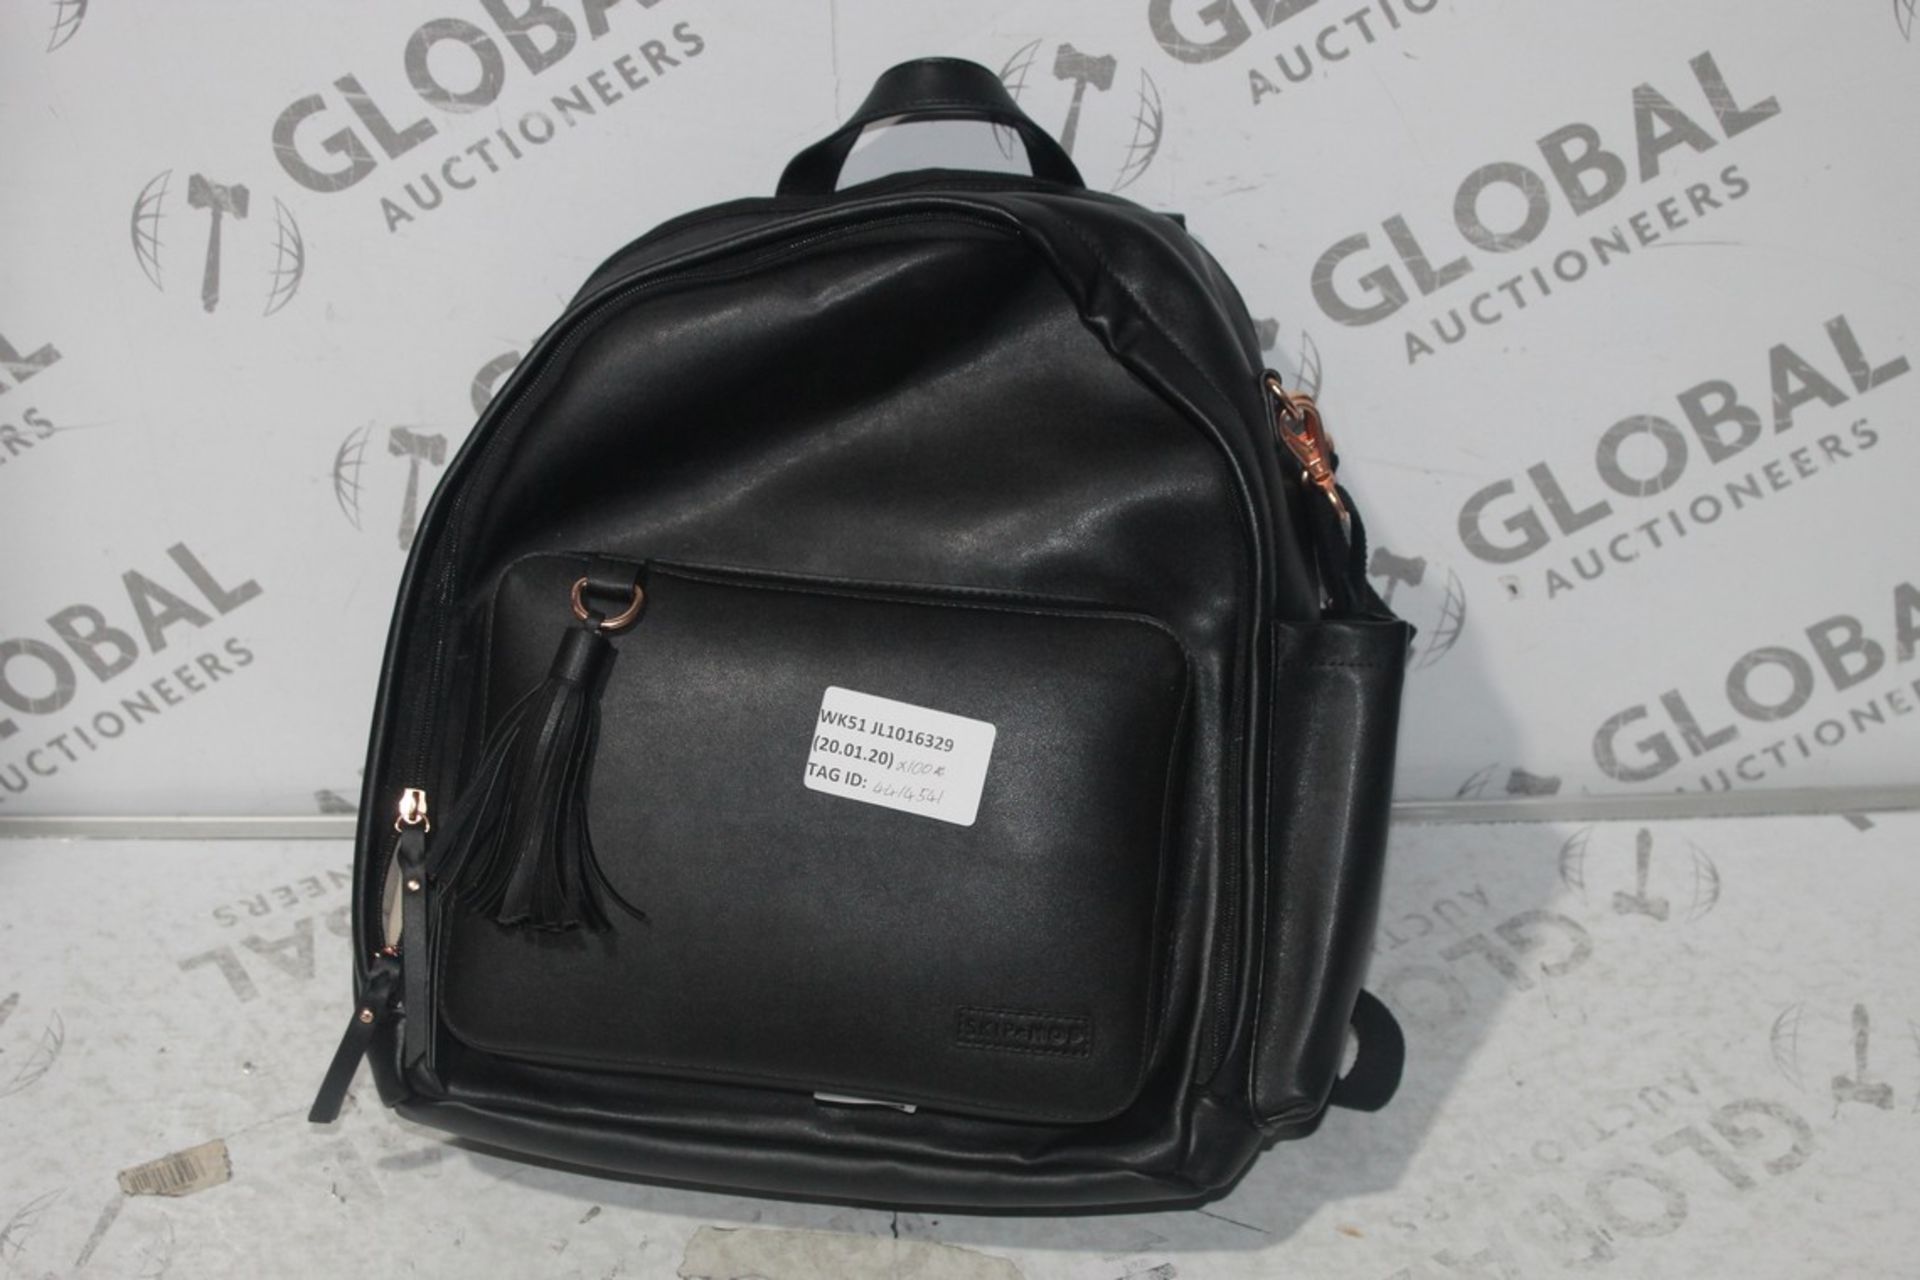 Skiphop Black Leather Nursery Changing Bag RRP £100 (4415071)(In Need of Attention) (Public